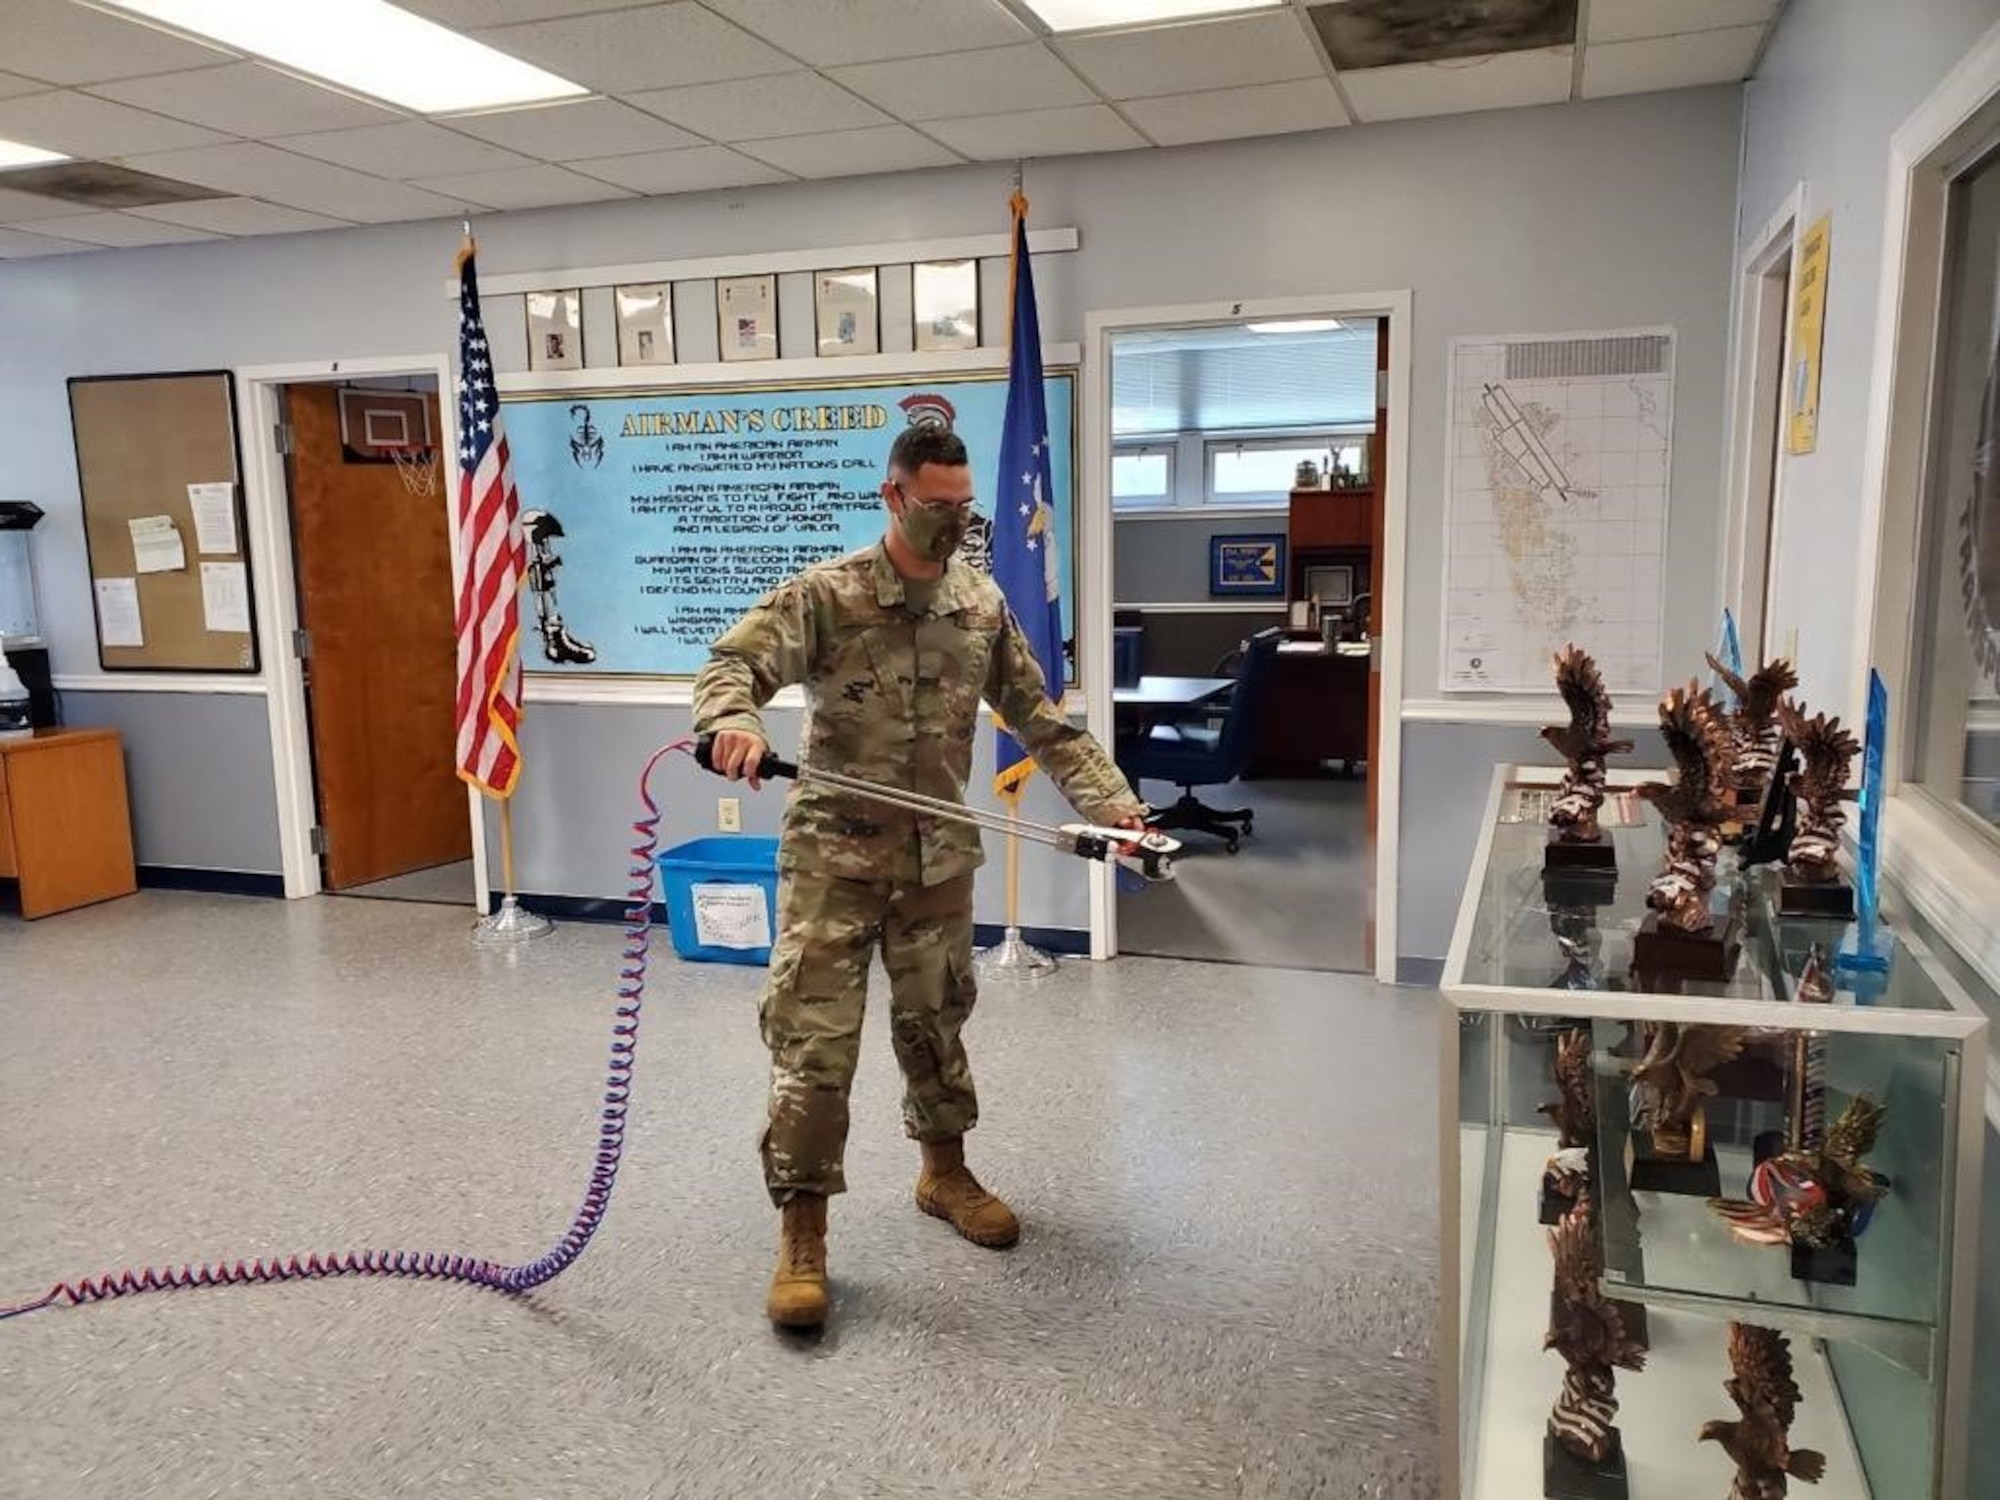 Photo shows an Airman indoors spraying disinfectant around his work area.